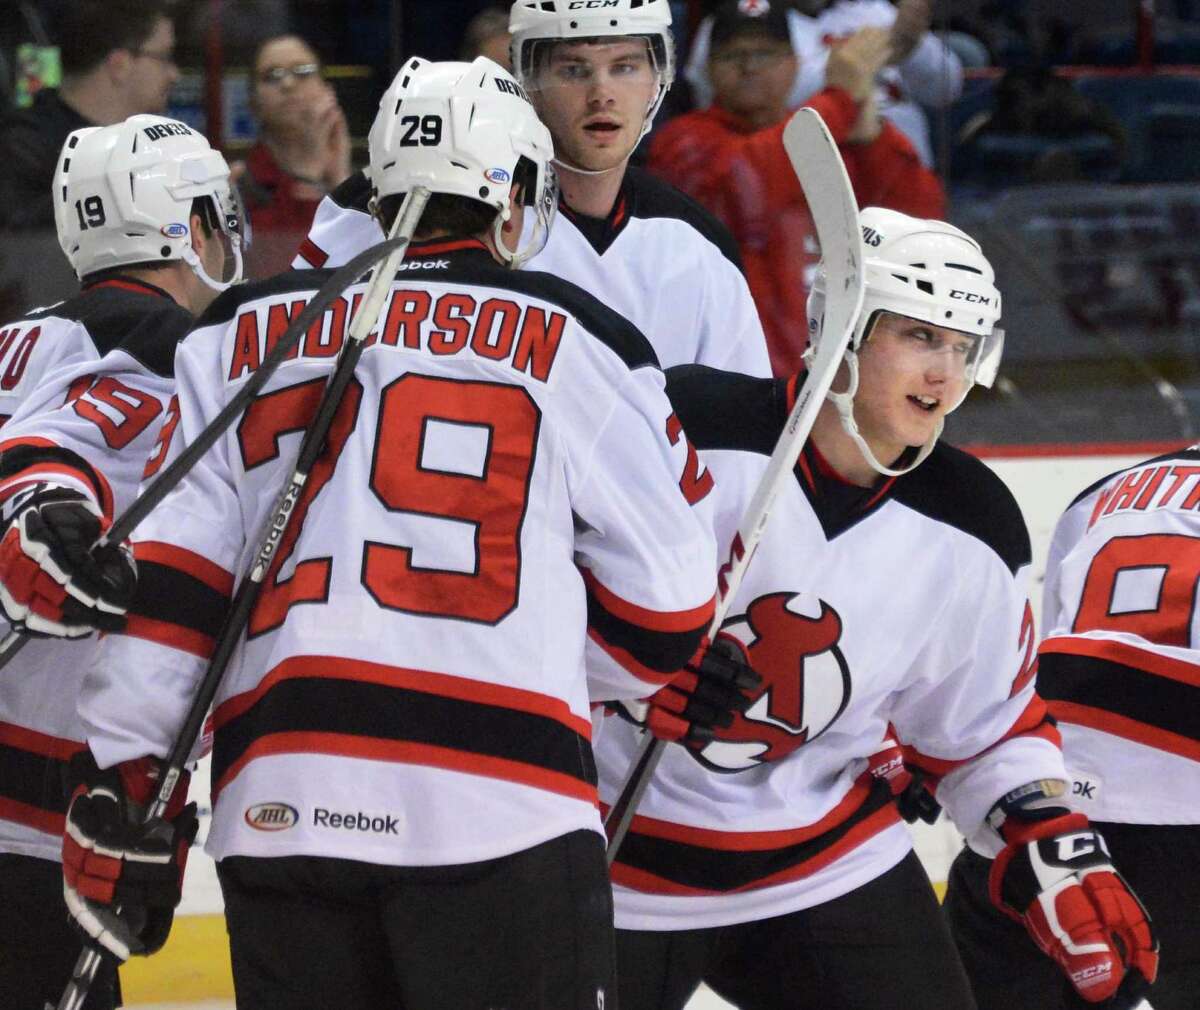 Albany Devils' #20 Reid Boucher, at right, and team mates celebrate his first period goal during Saturday's game against the Portland Pirates at the Times Union Center in Albany March 30, 2013. (John Carl D'Annibale / Times Union)